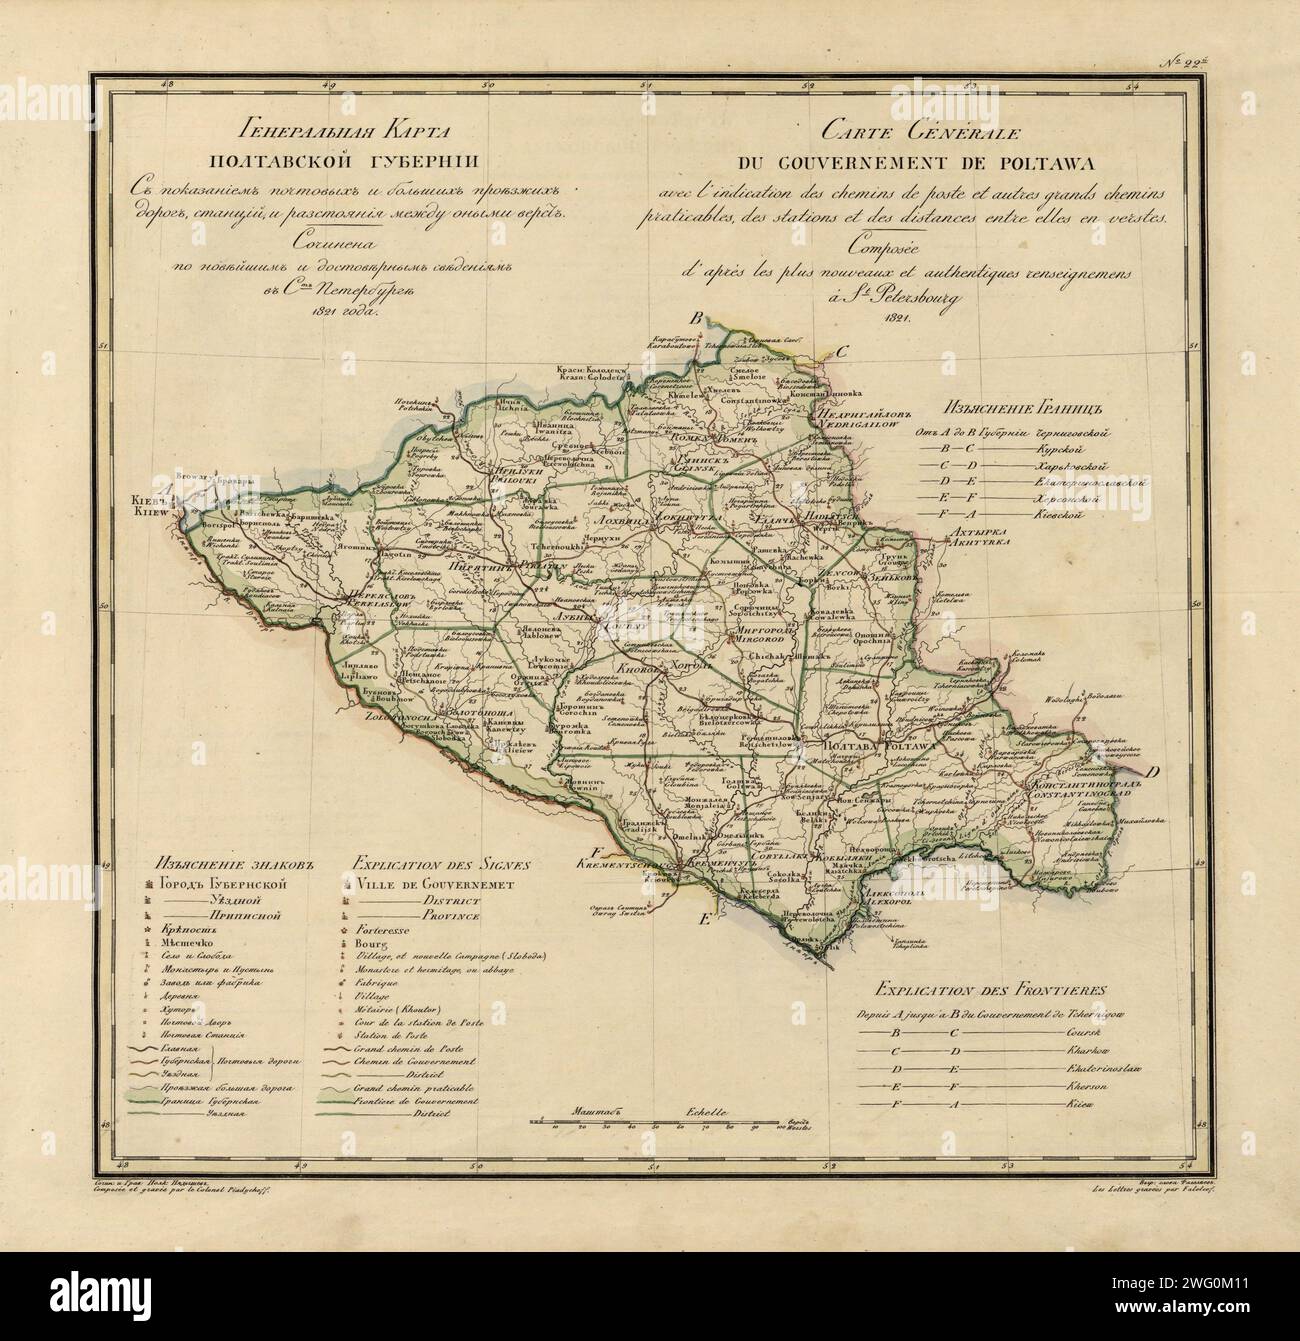 General Map of Poltava Province: Showing Postal and Major Roads, Stations and the Distance in Versts between Them, 1821. This 1821 map of Poltava Provinceis from a larger work,Geograficheskii atlas Rossiiskoi imperii, tsarstva Pol'skogo i velikogo kniazhestva Finliandskogo(Geographical atlas of the Russian Empire, the Kingdom of Poland, and the Grand Duchy of Finland), containing 60 maps of the Russian Empire. Compiled and engraved by Colonel V.P. Piadyshev, it reflects the detailed mapping carried out by Russian military cartographers in the first quarter of the 19th century. The map shows po Stock Photo